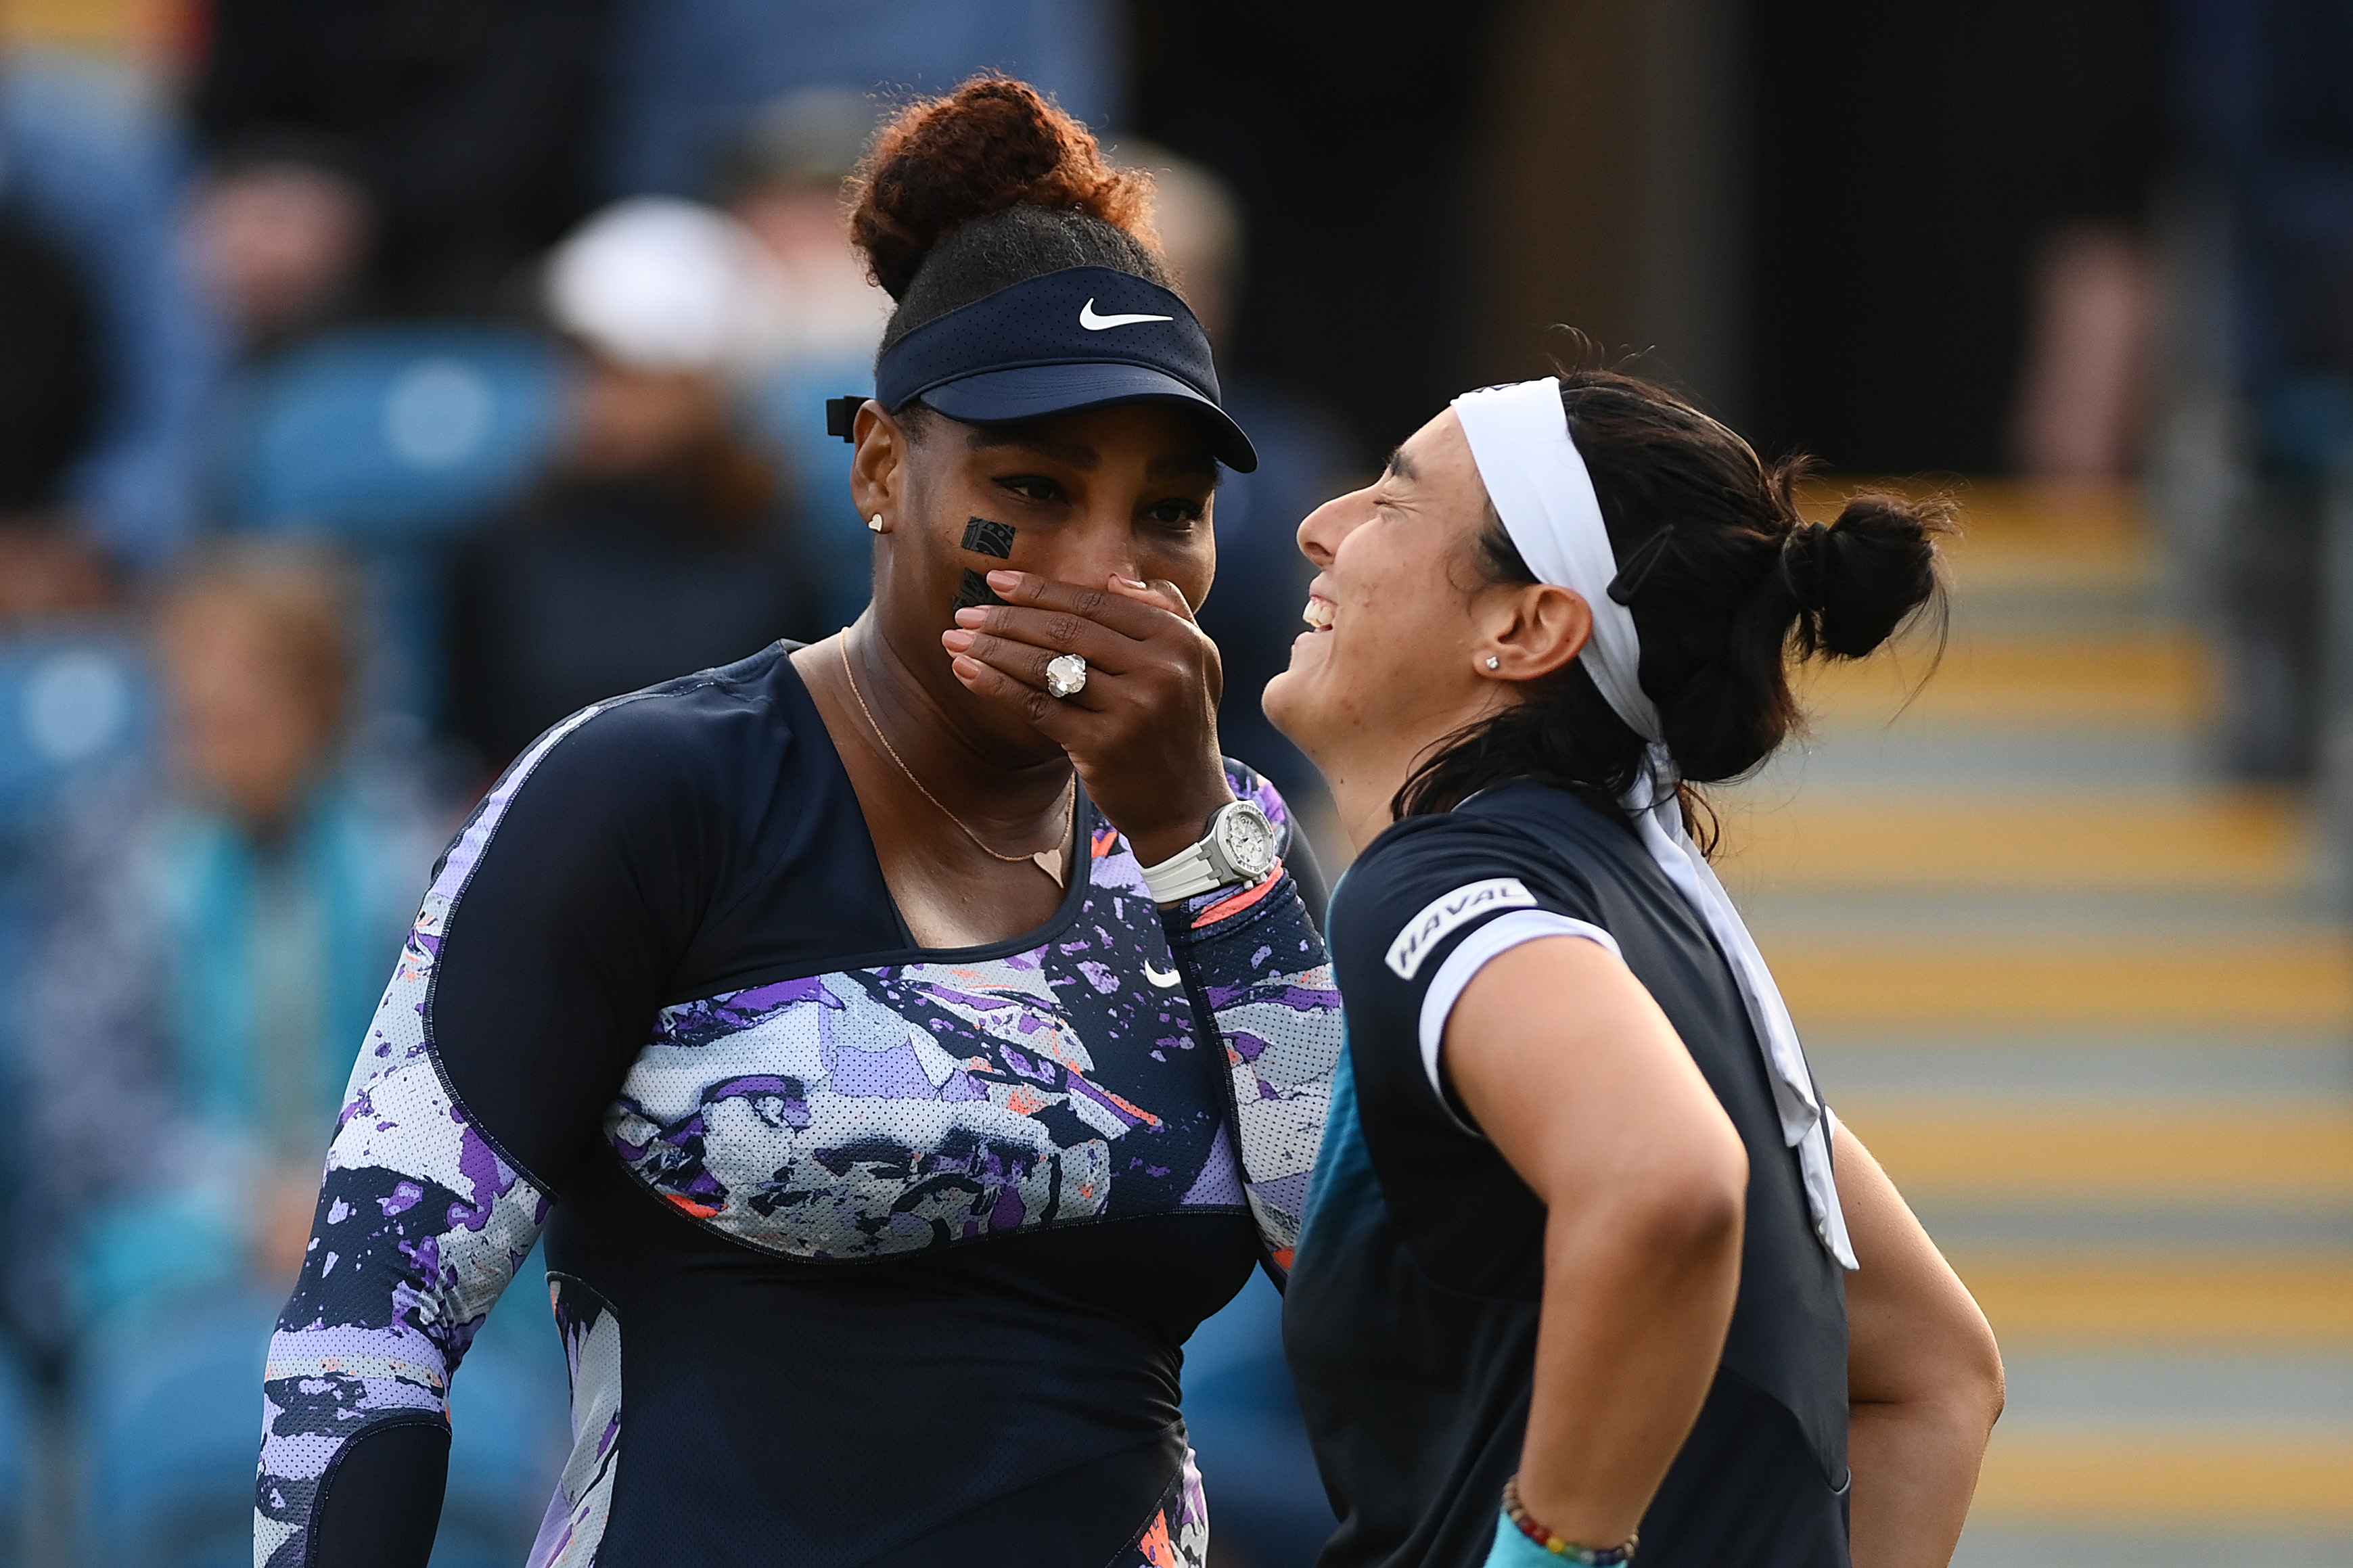 Serena Williams of United States of America and Ons Jabeur of Tunisia interact during their Women's Doubles Round One match against Marie Bouzkova of Czech Republic and Sara Sorribes Tormo of Spain on Day 4 of the Rothesay International at Devonshire Park on June 21, 2022 in Eastbourne, England. (Photo by Mike Hewitt/Getty Images)